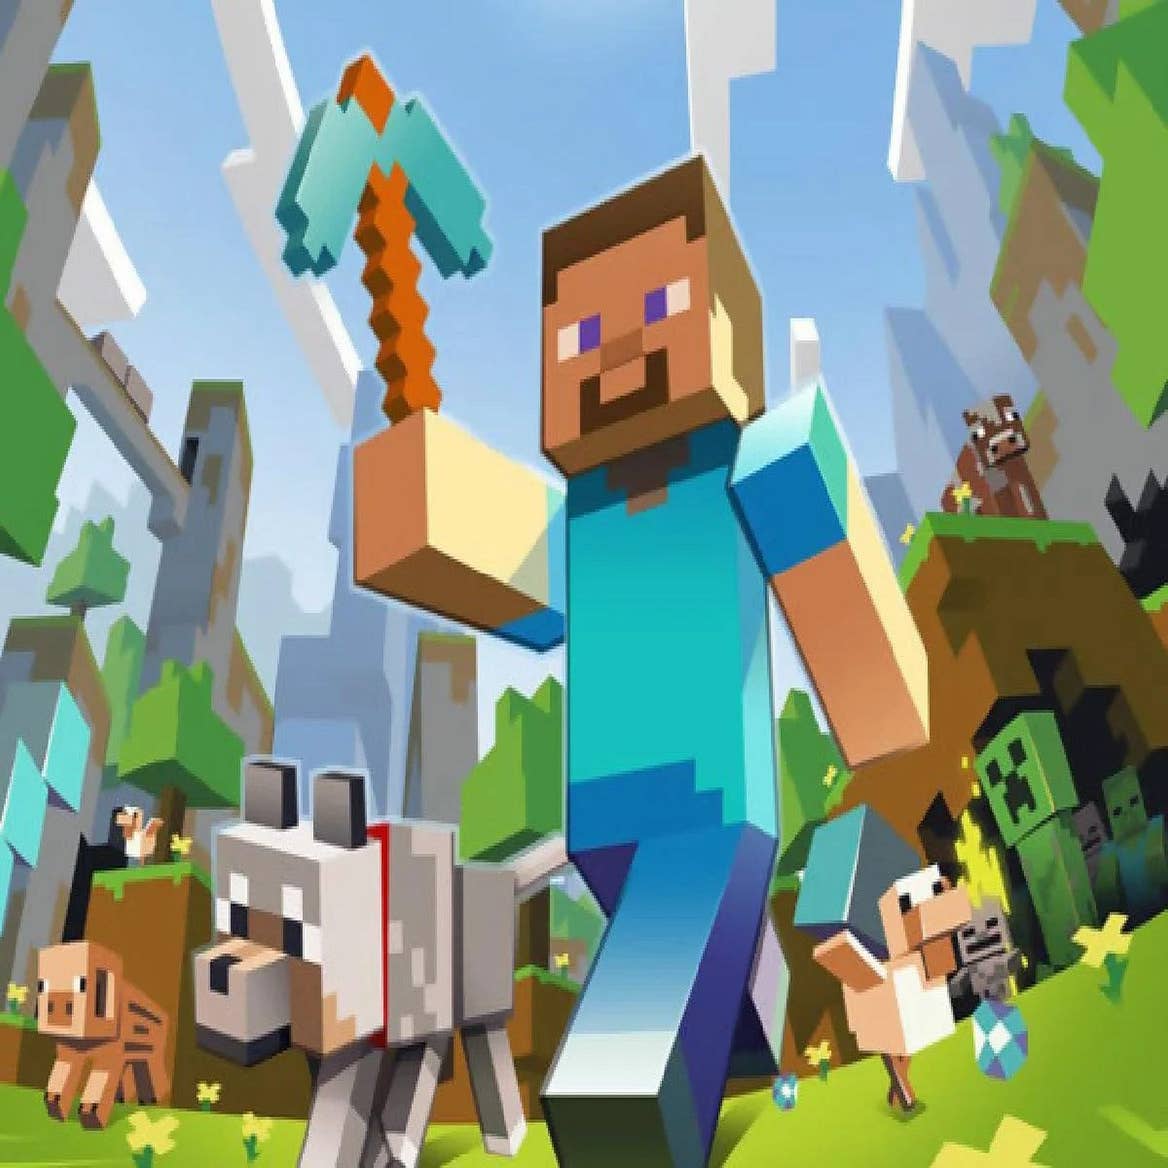 Minecraft: Play with Game Pass